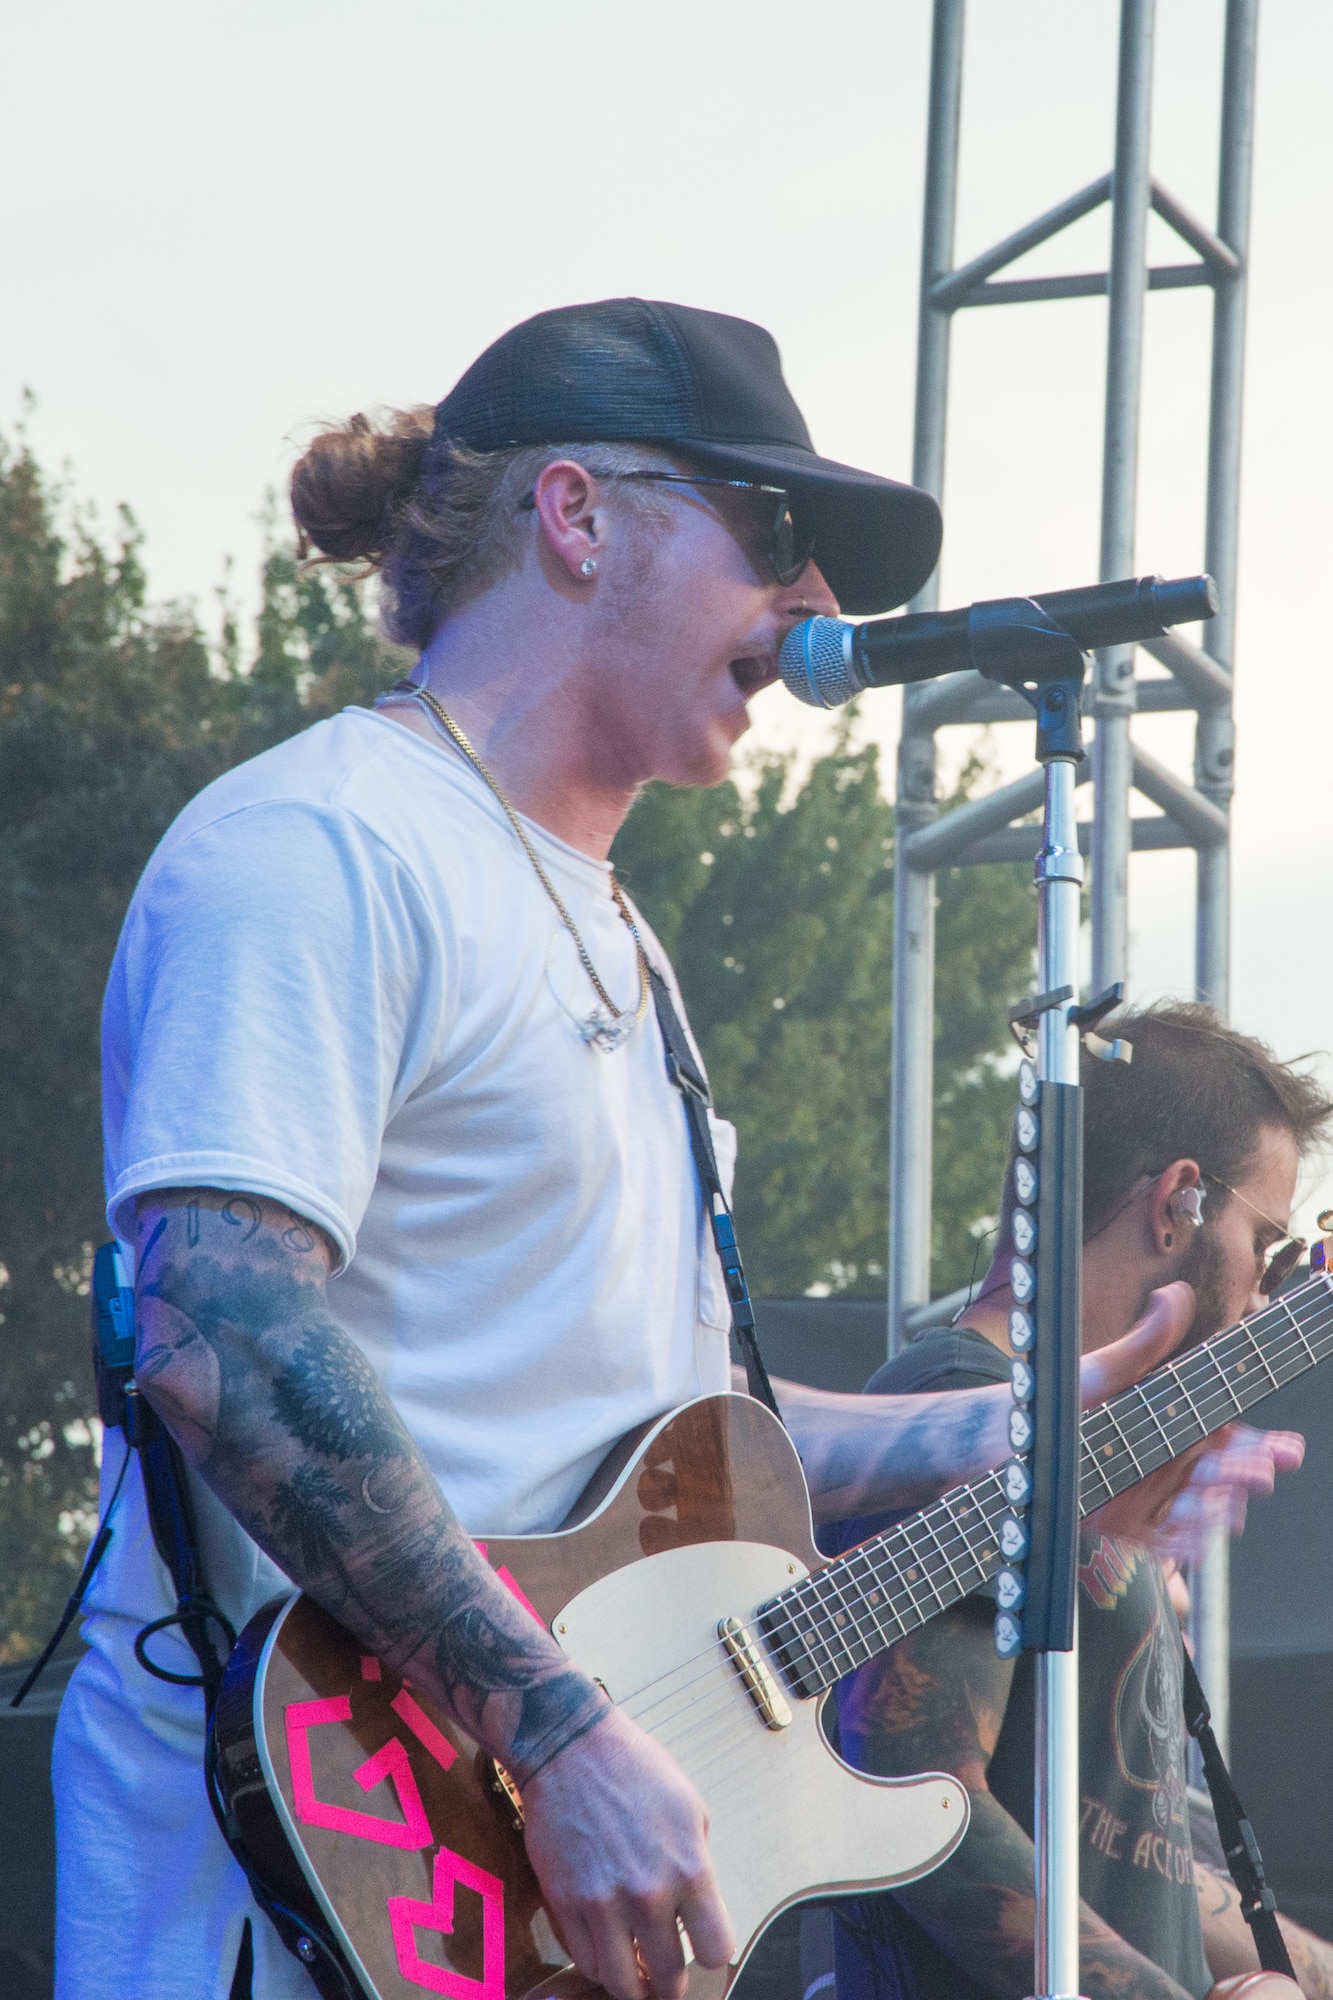 We the Kings lead vocalist Travis Clark sings during the End of Summer Music Festival Sept. 2, 2018, at Dover Air Force Base, Del. This was the first time the Floridian rock band performed in Delaware. (U.S. Air Force photo by Airman 1st Class Dedan Dials)